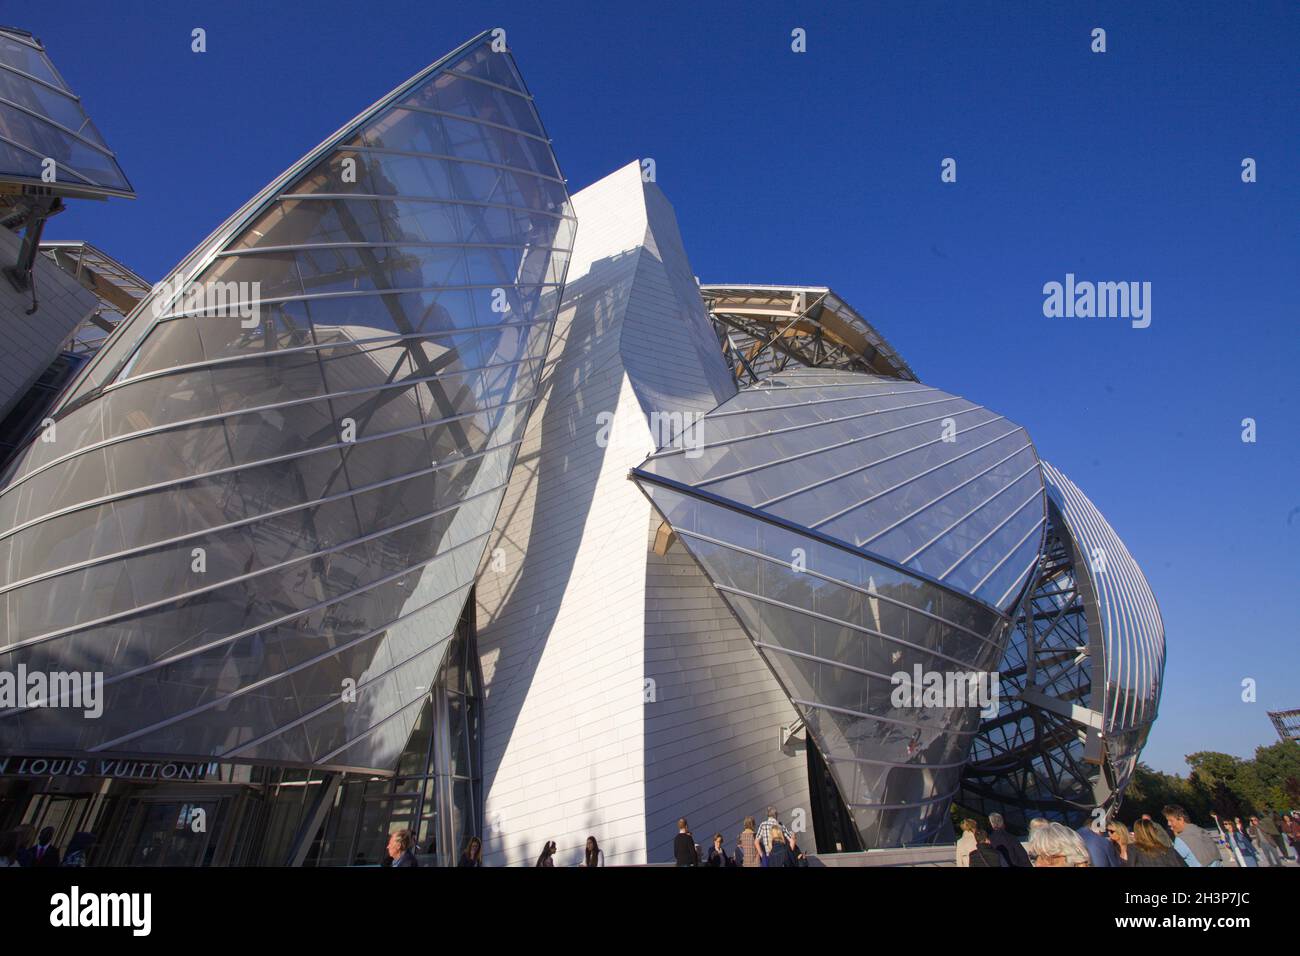 View of the Fondation Louis Vuitton museum, designed by Frank